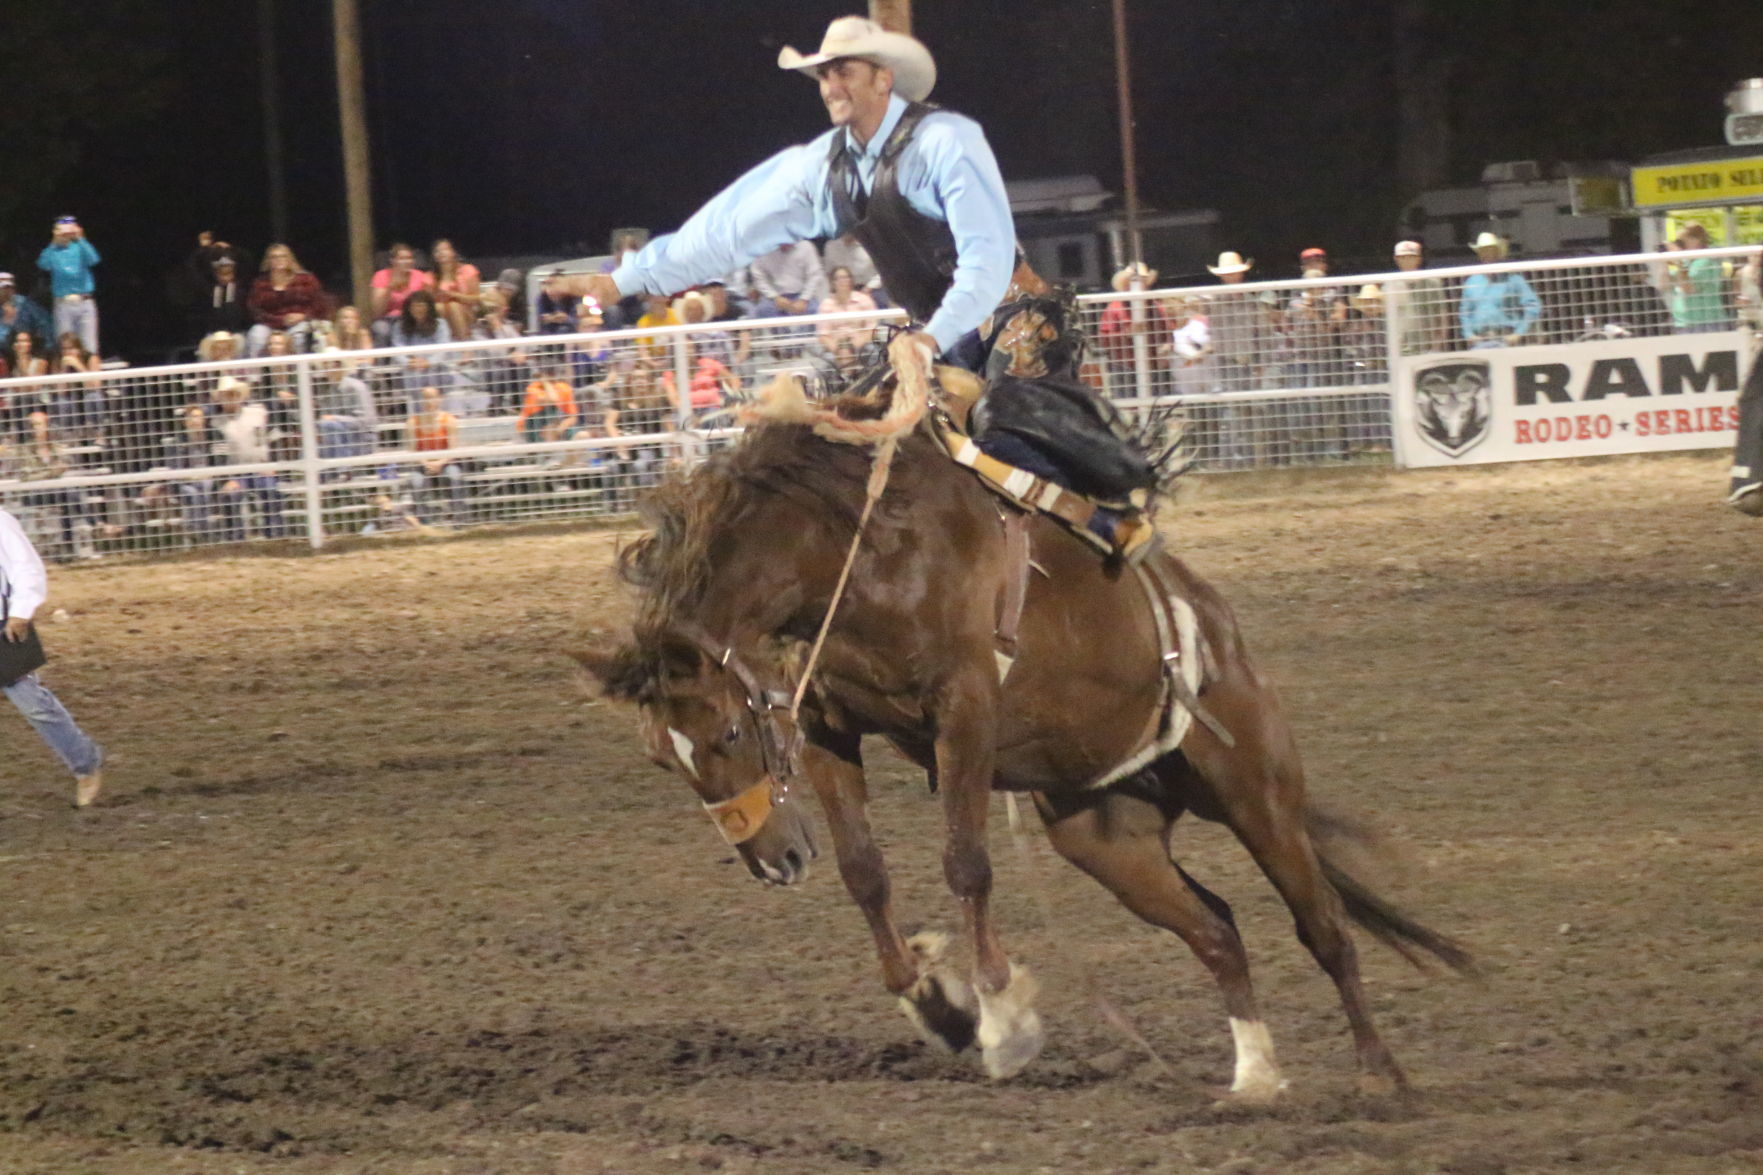 No show this year, but Crawford rodeo has rich history photo